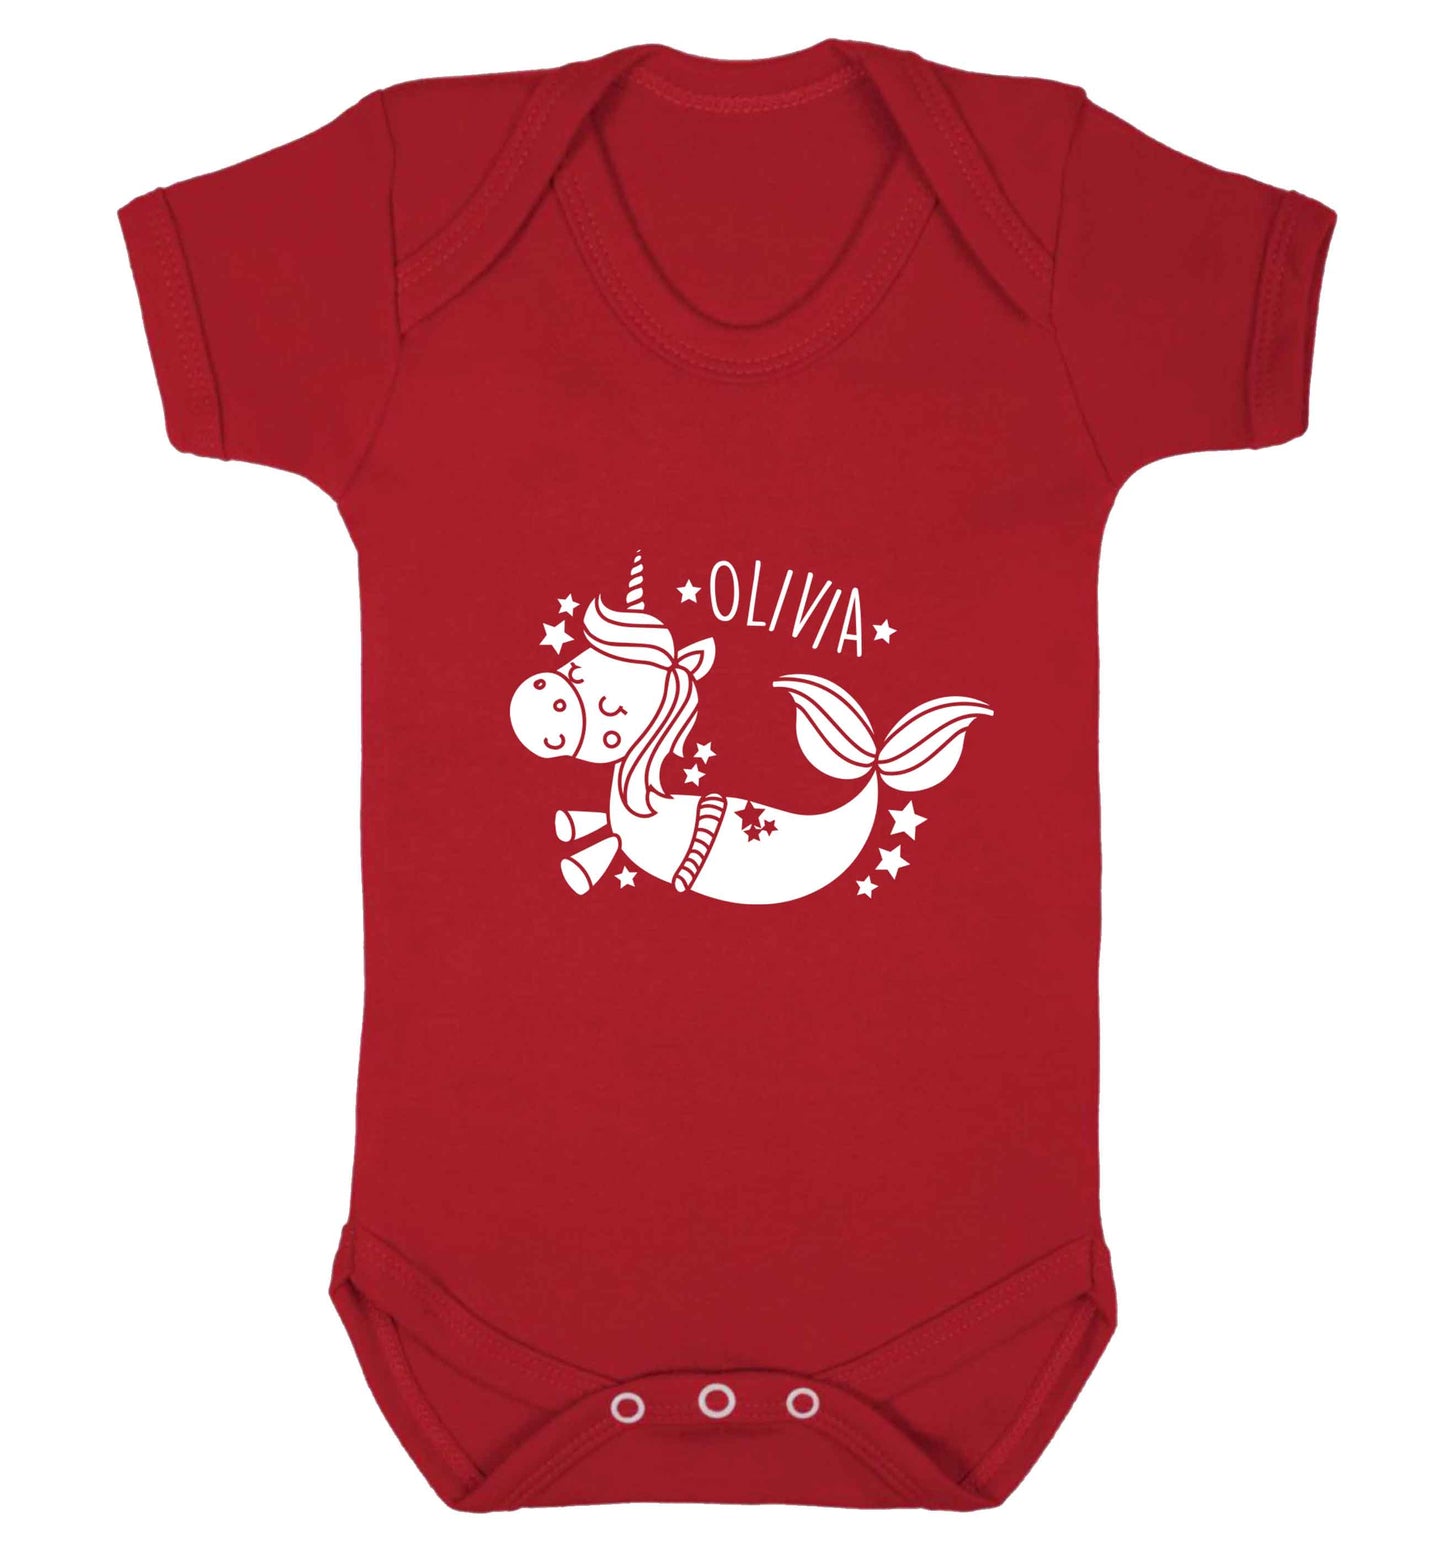 Unicorn mermaid - any name baby vest red 18-24 months